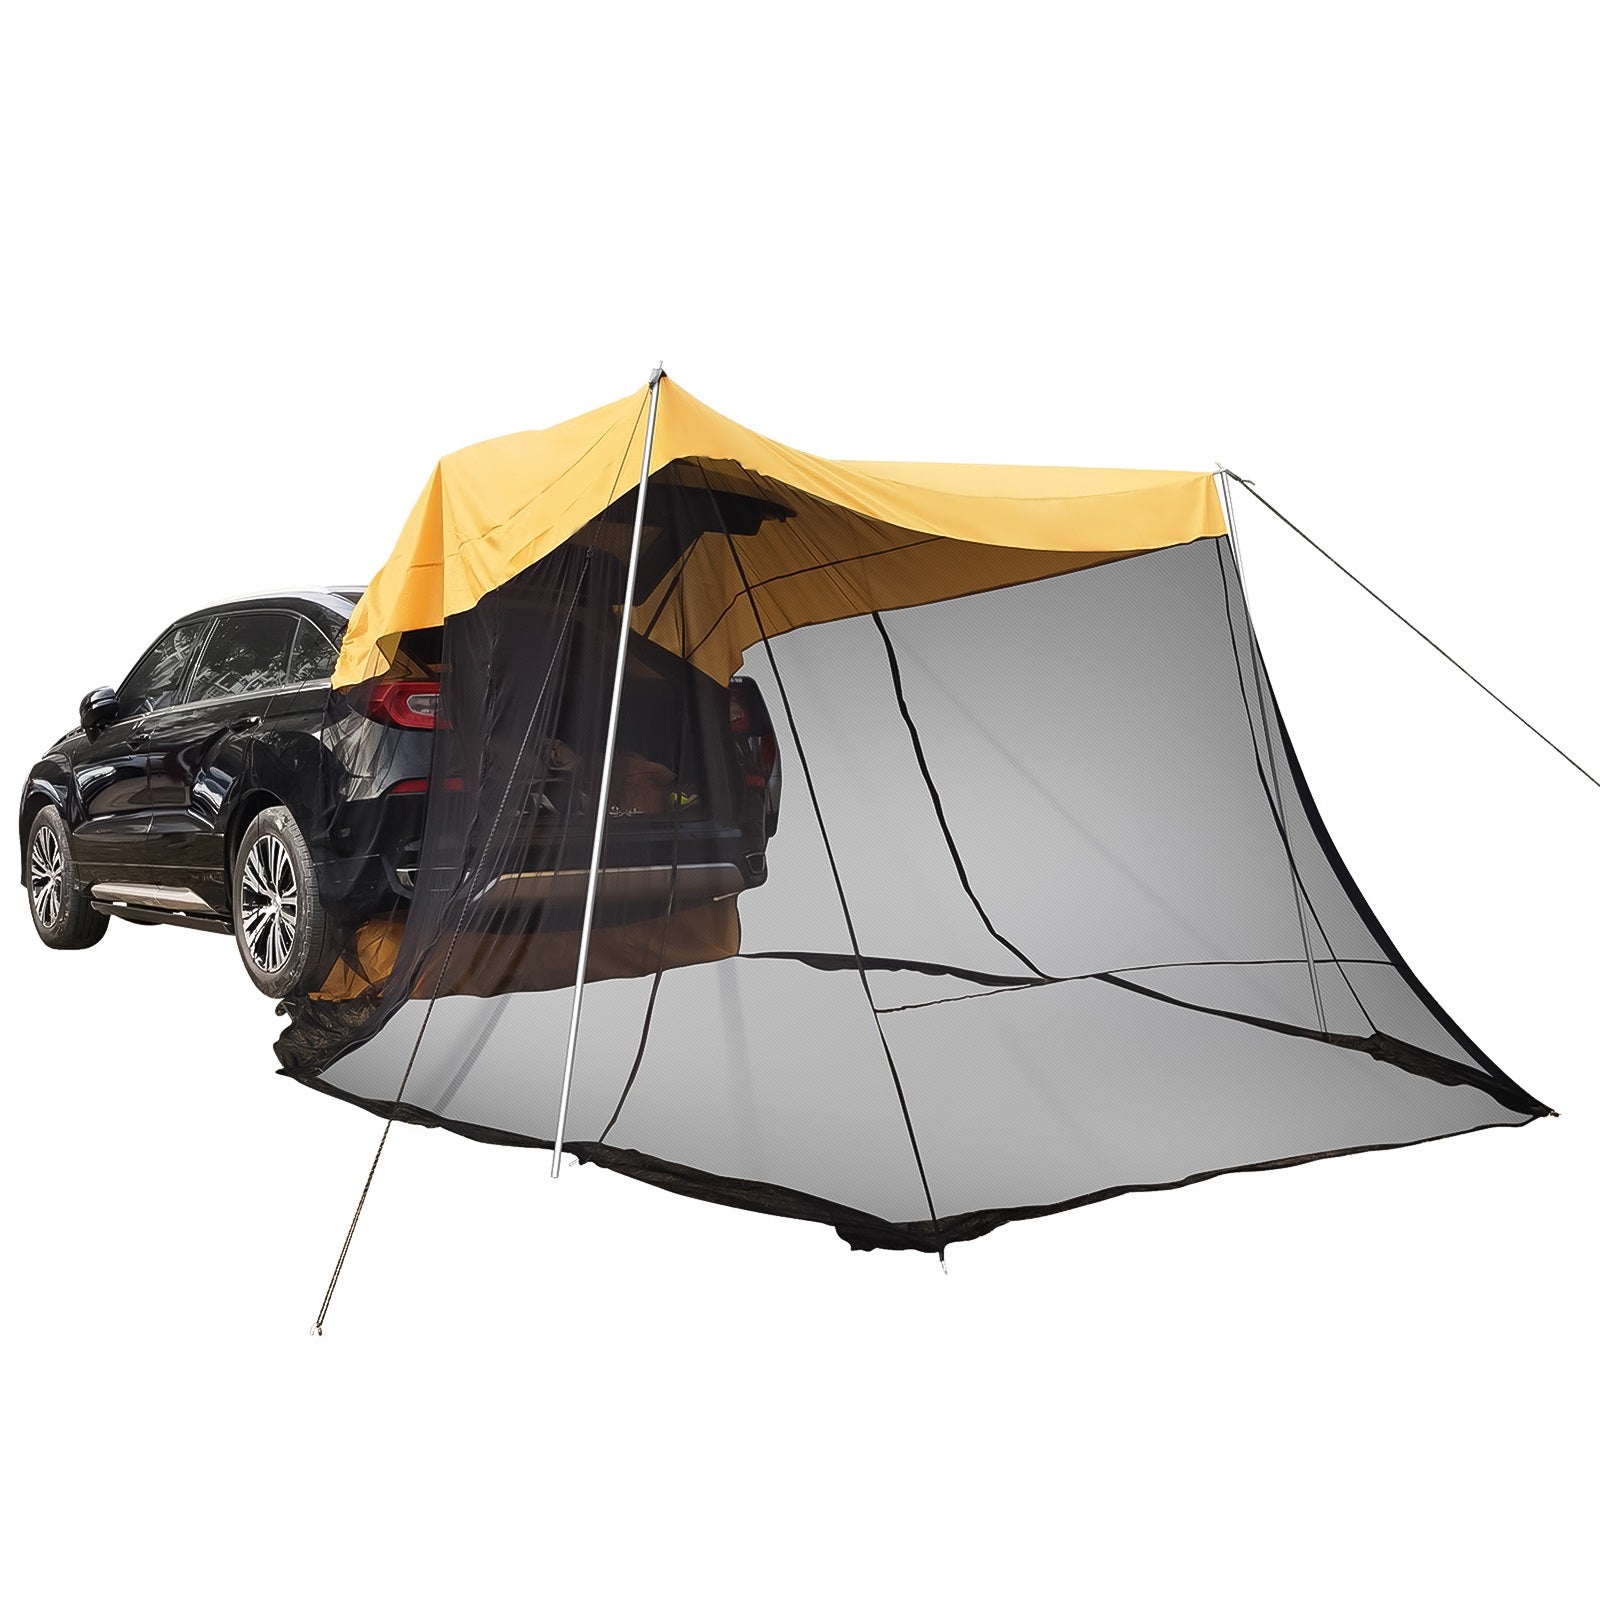 SUV Rear Tent | Car Awning Sun Shelter with Mosquito Net